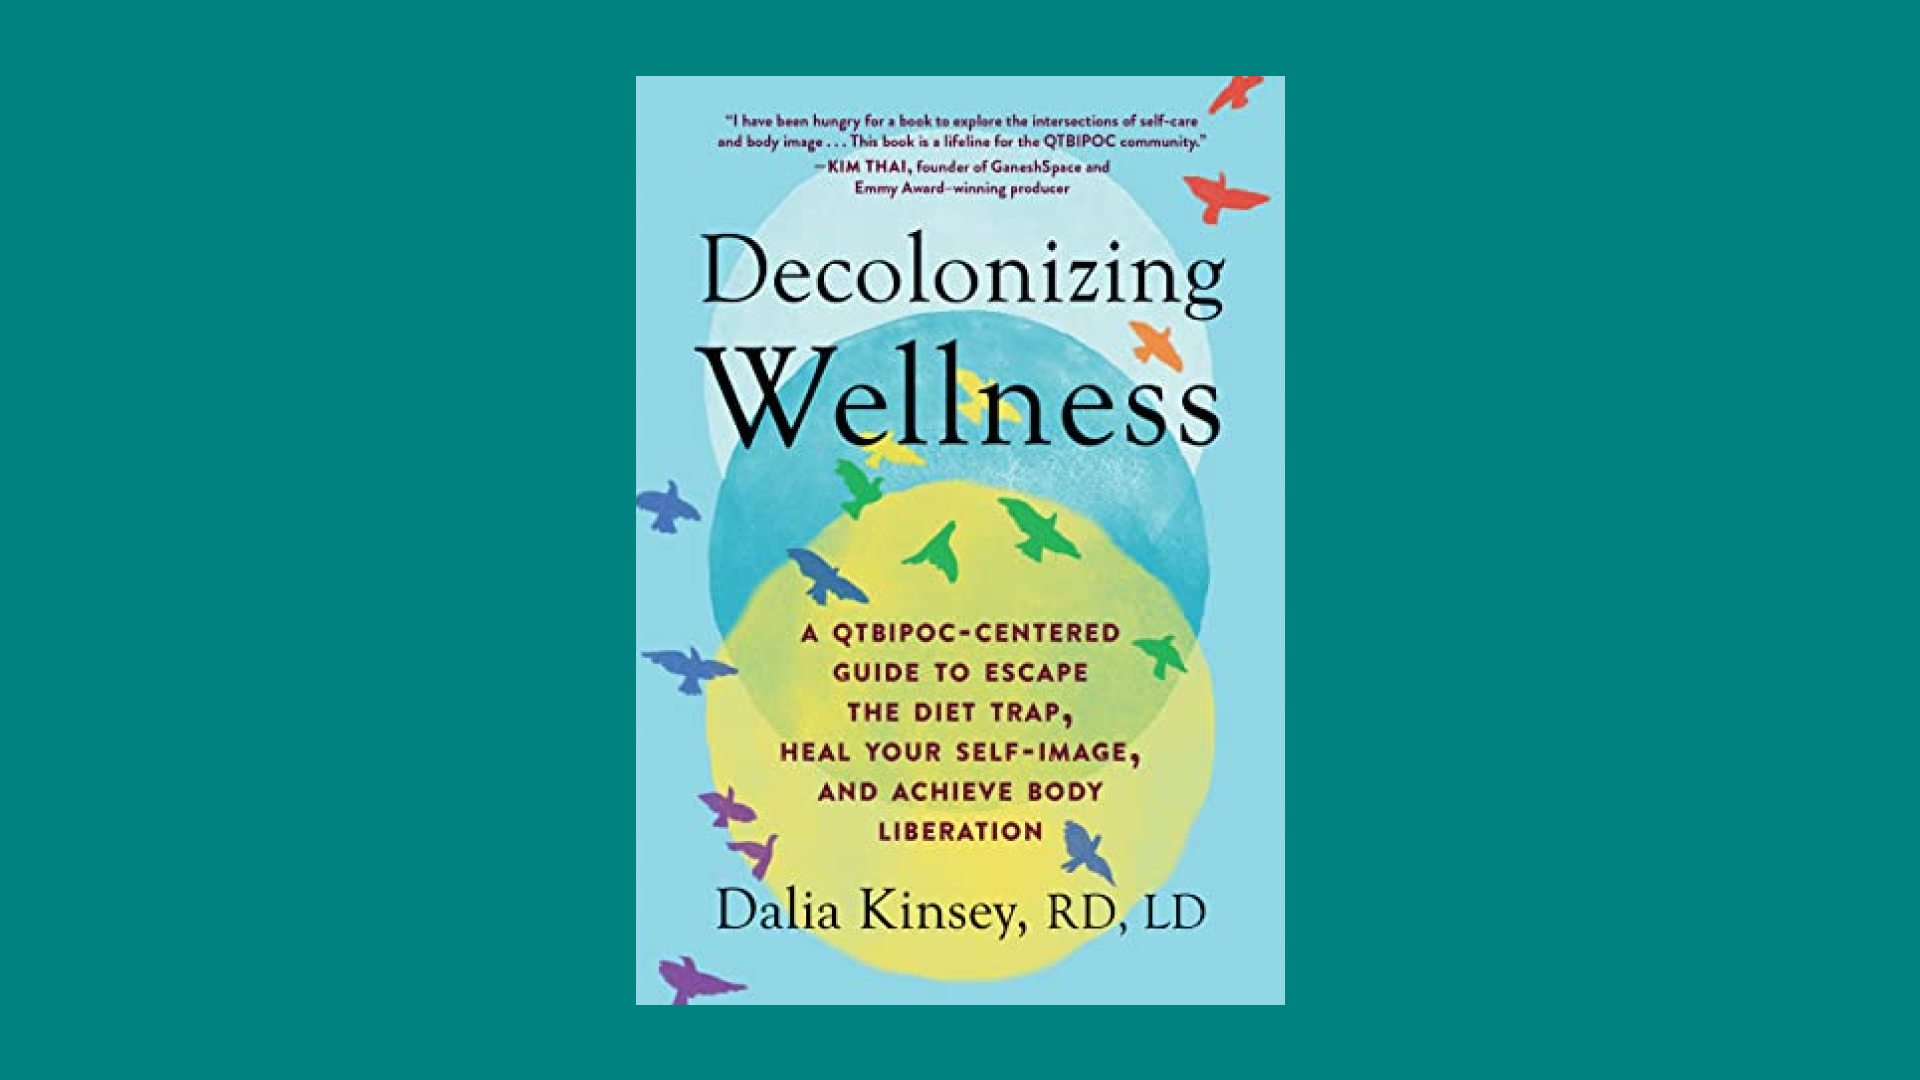 “Decolonizing Wellness: A QTBIPOC-Centered Guide to Escape the Diet Trap, Heal Your Self-Image, and Achieve Body Liberation” by Dalia Kinsey